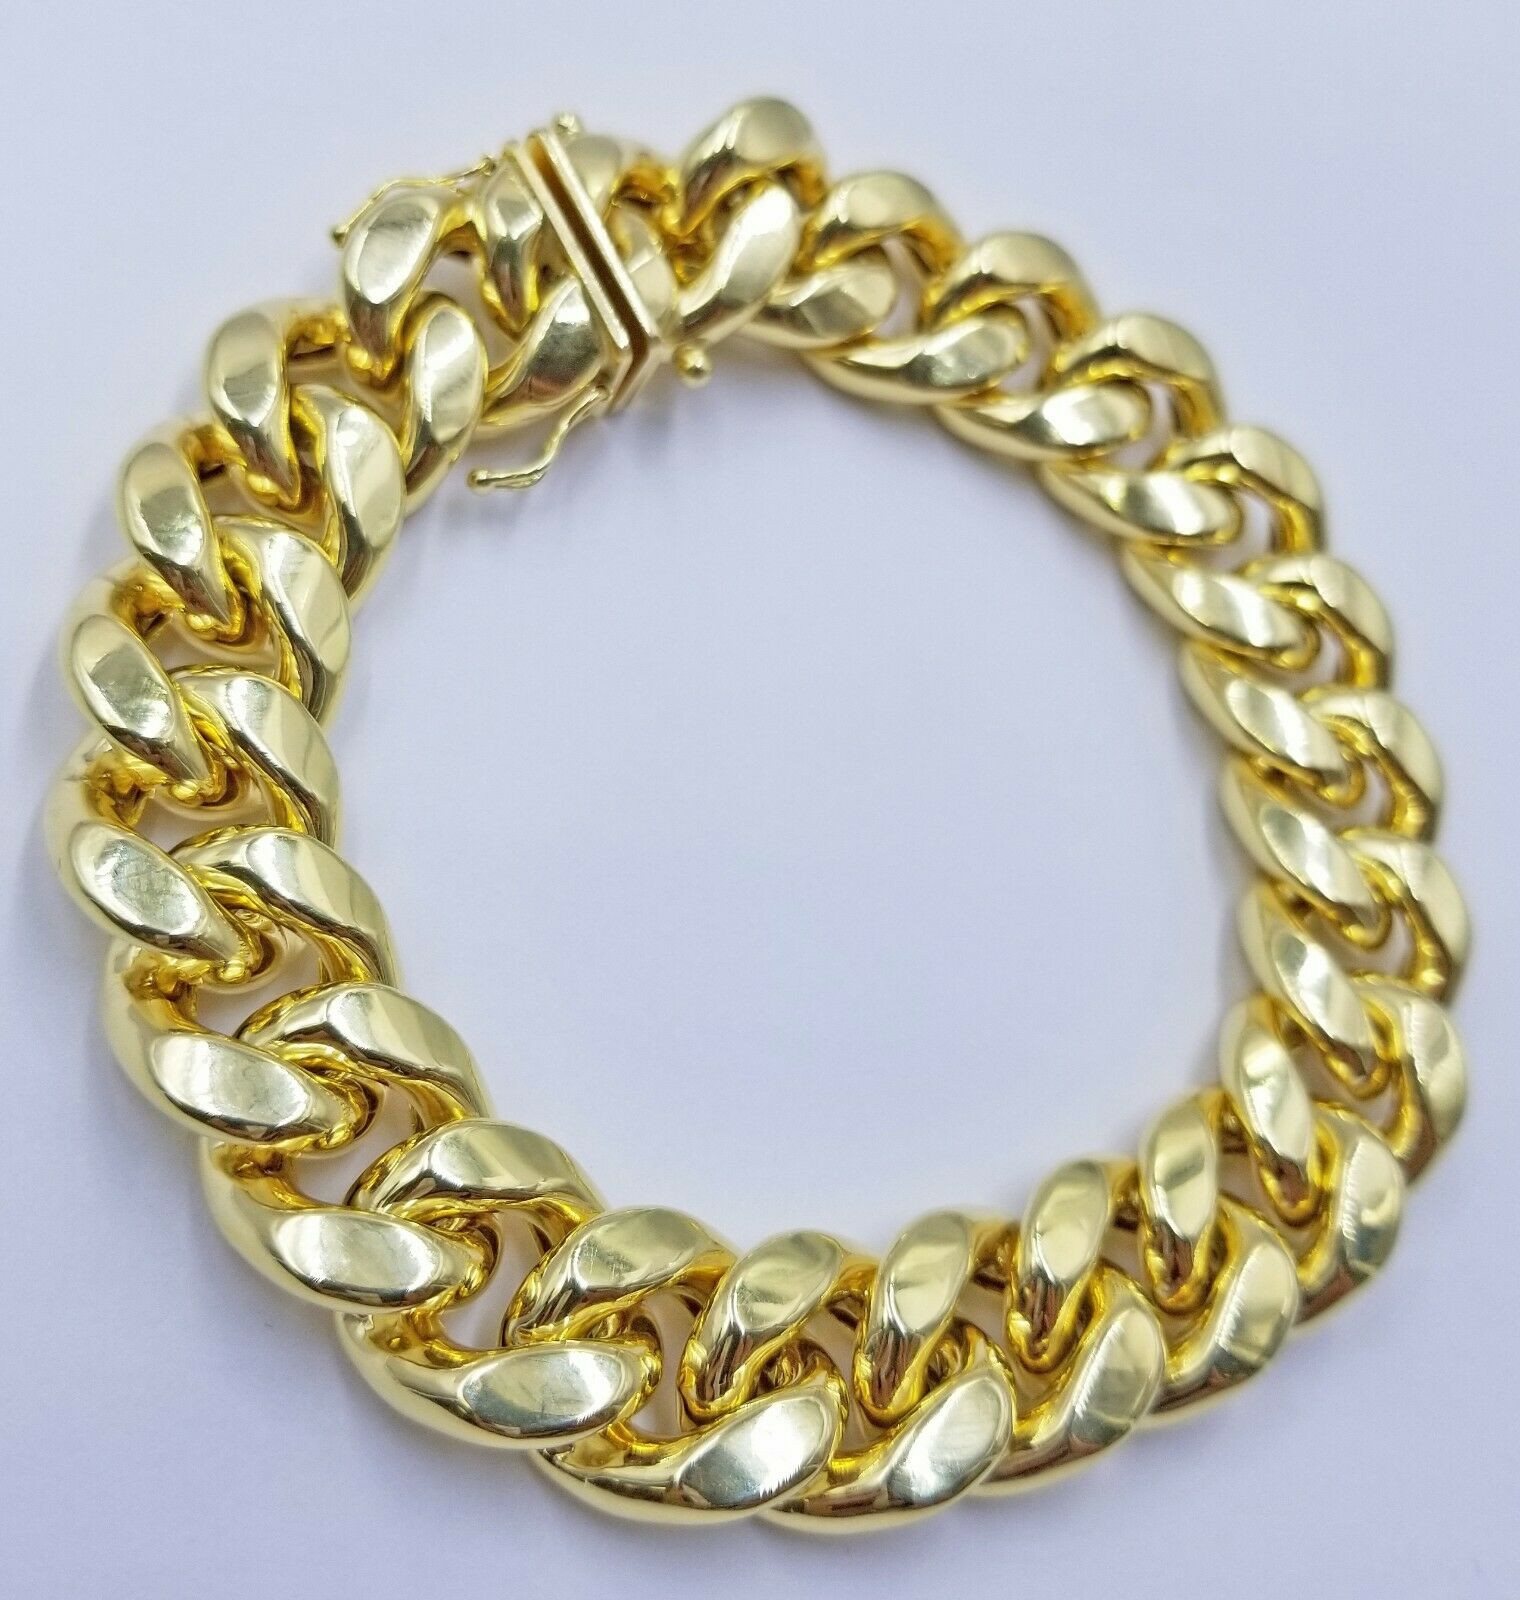 15mm 10k Gold Mens Bracelet Miami Cuban Link 7.5" Thick 10kt Yellow Gold REAL